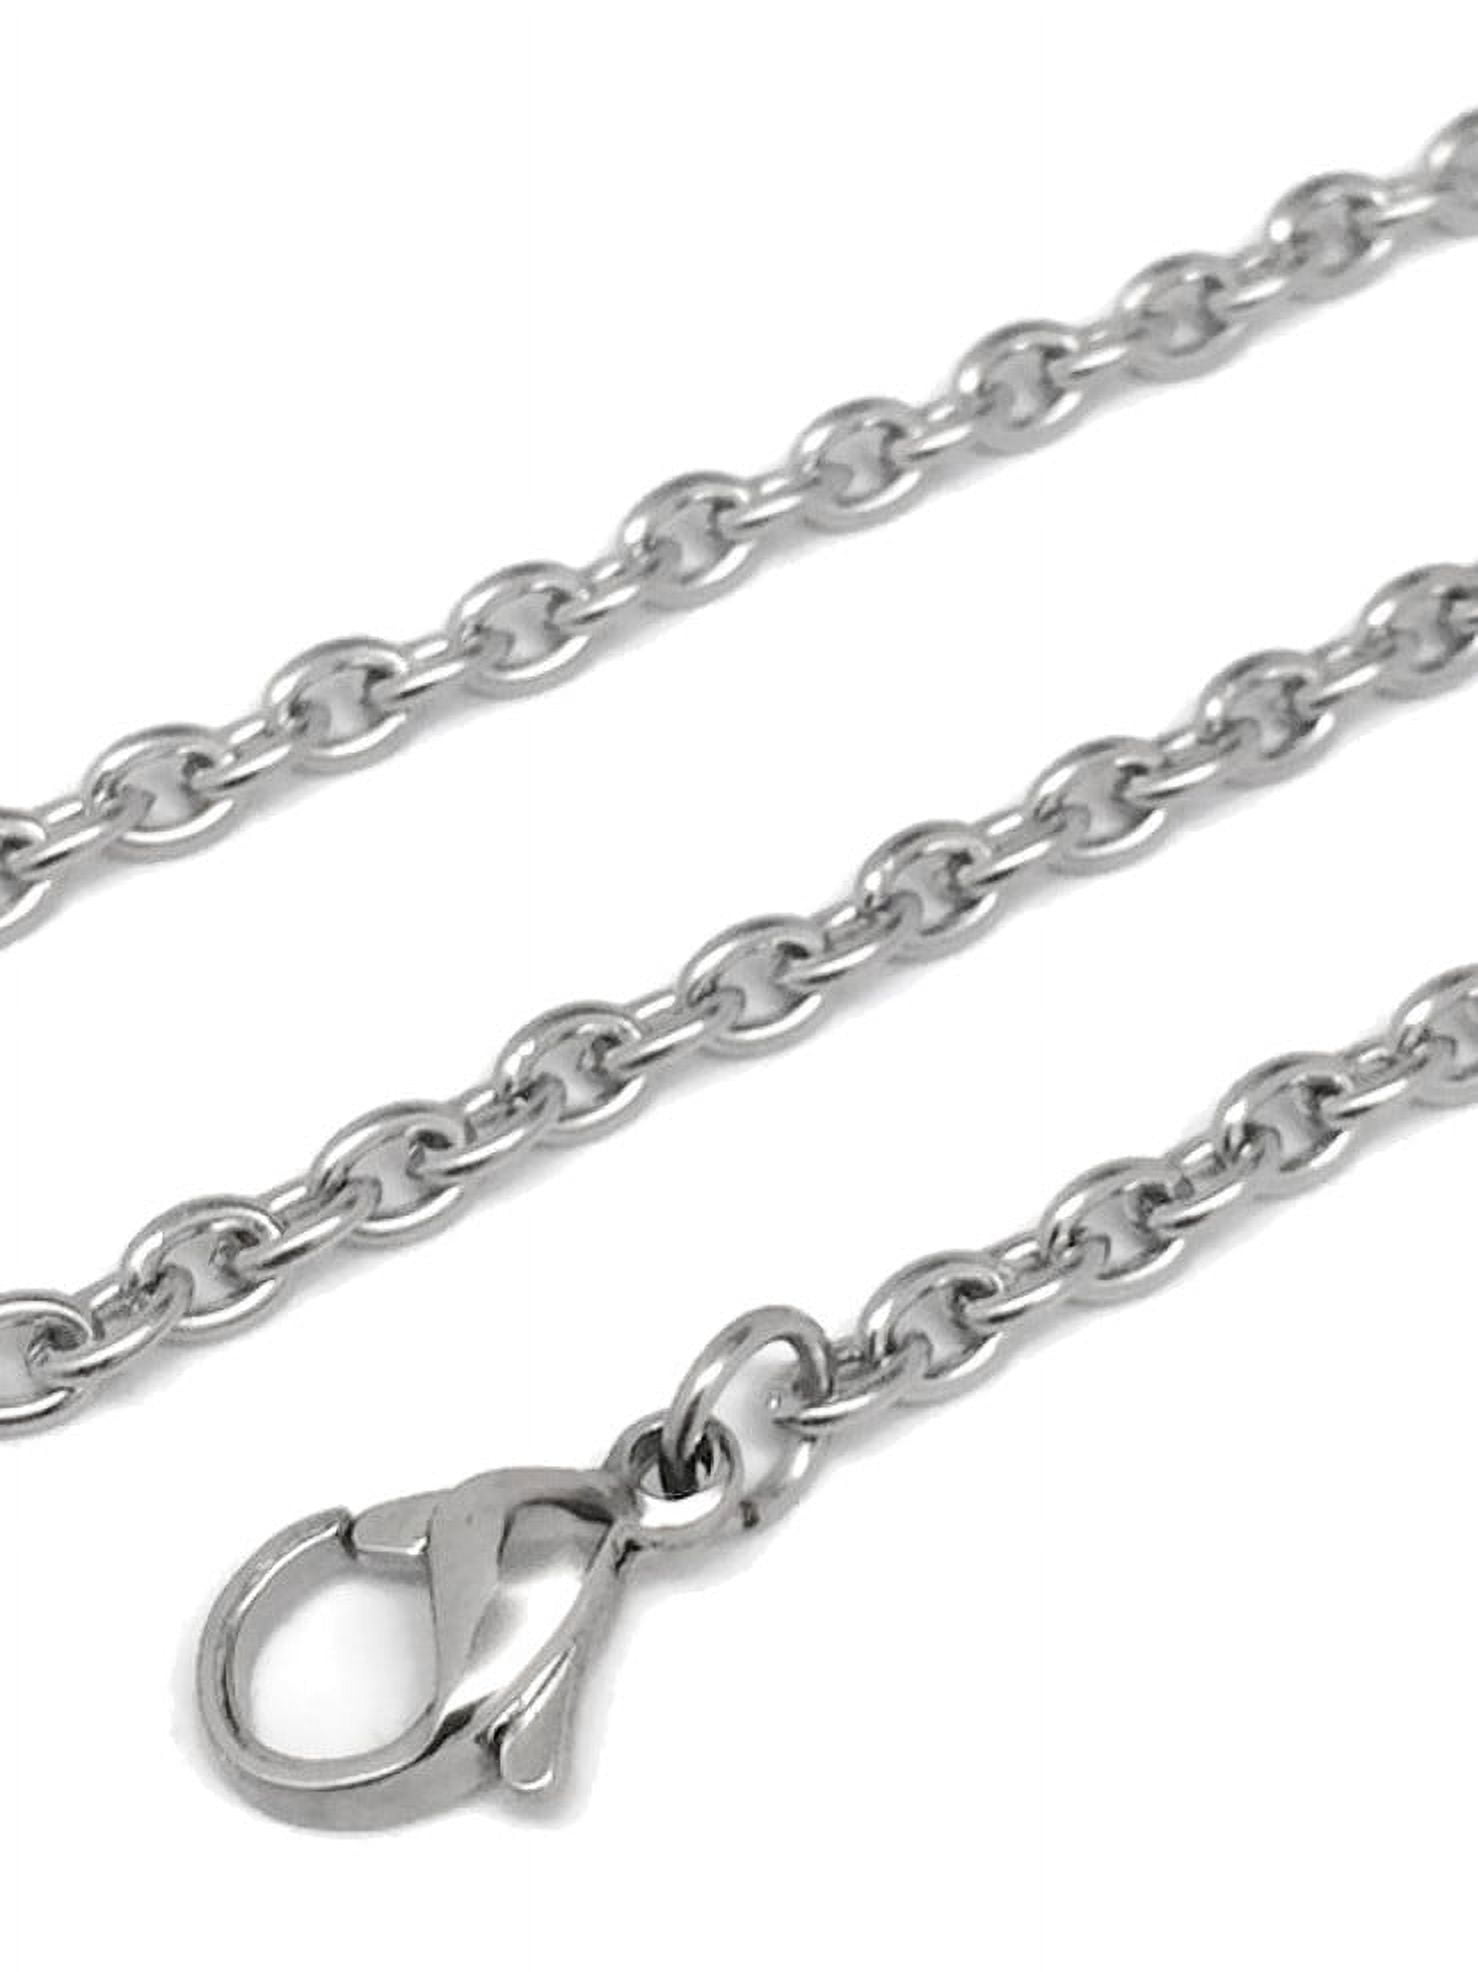 Necklaces for Men , Stainless Steel Chain With Lobster Clasp , 5 Mm  Thickness , 18 20 22 24 28 30 Inches , ST002 